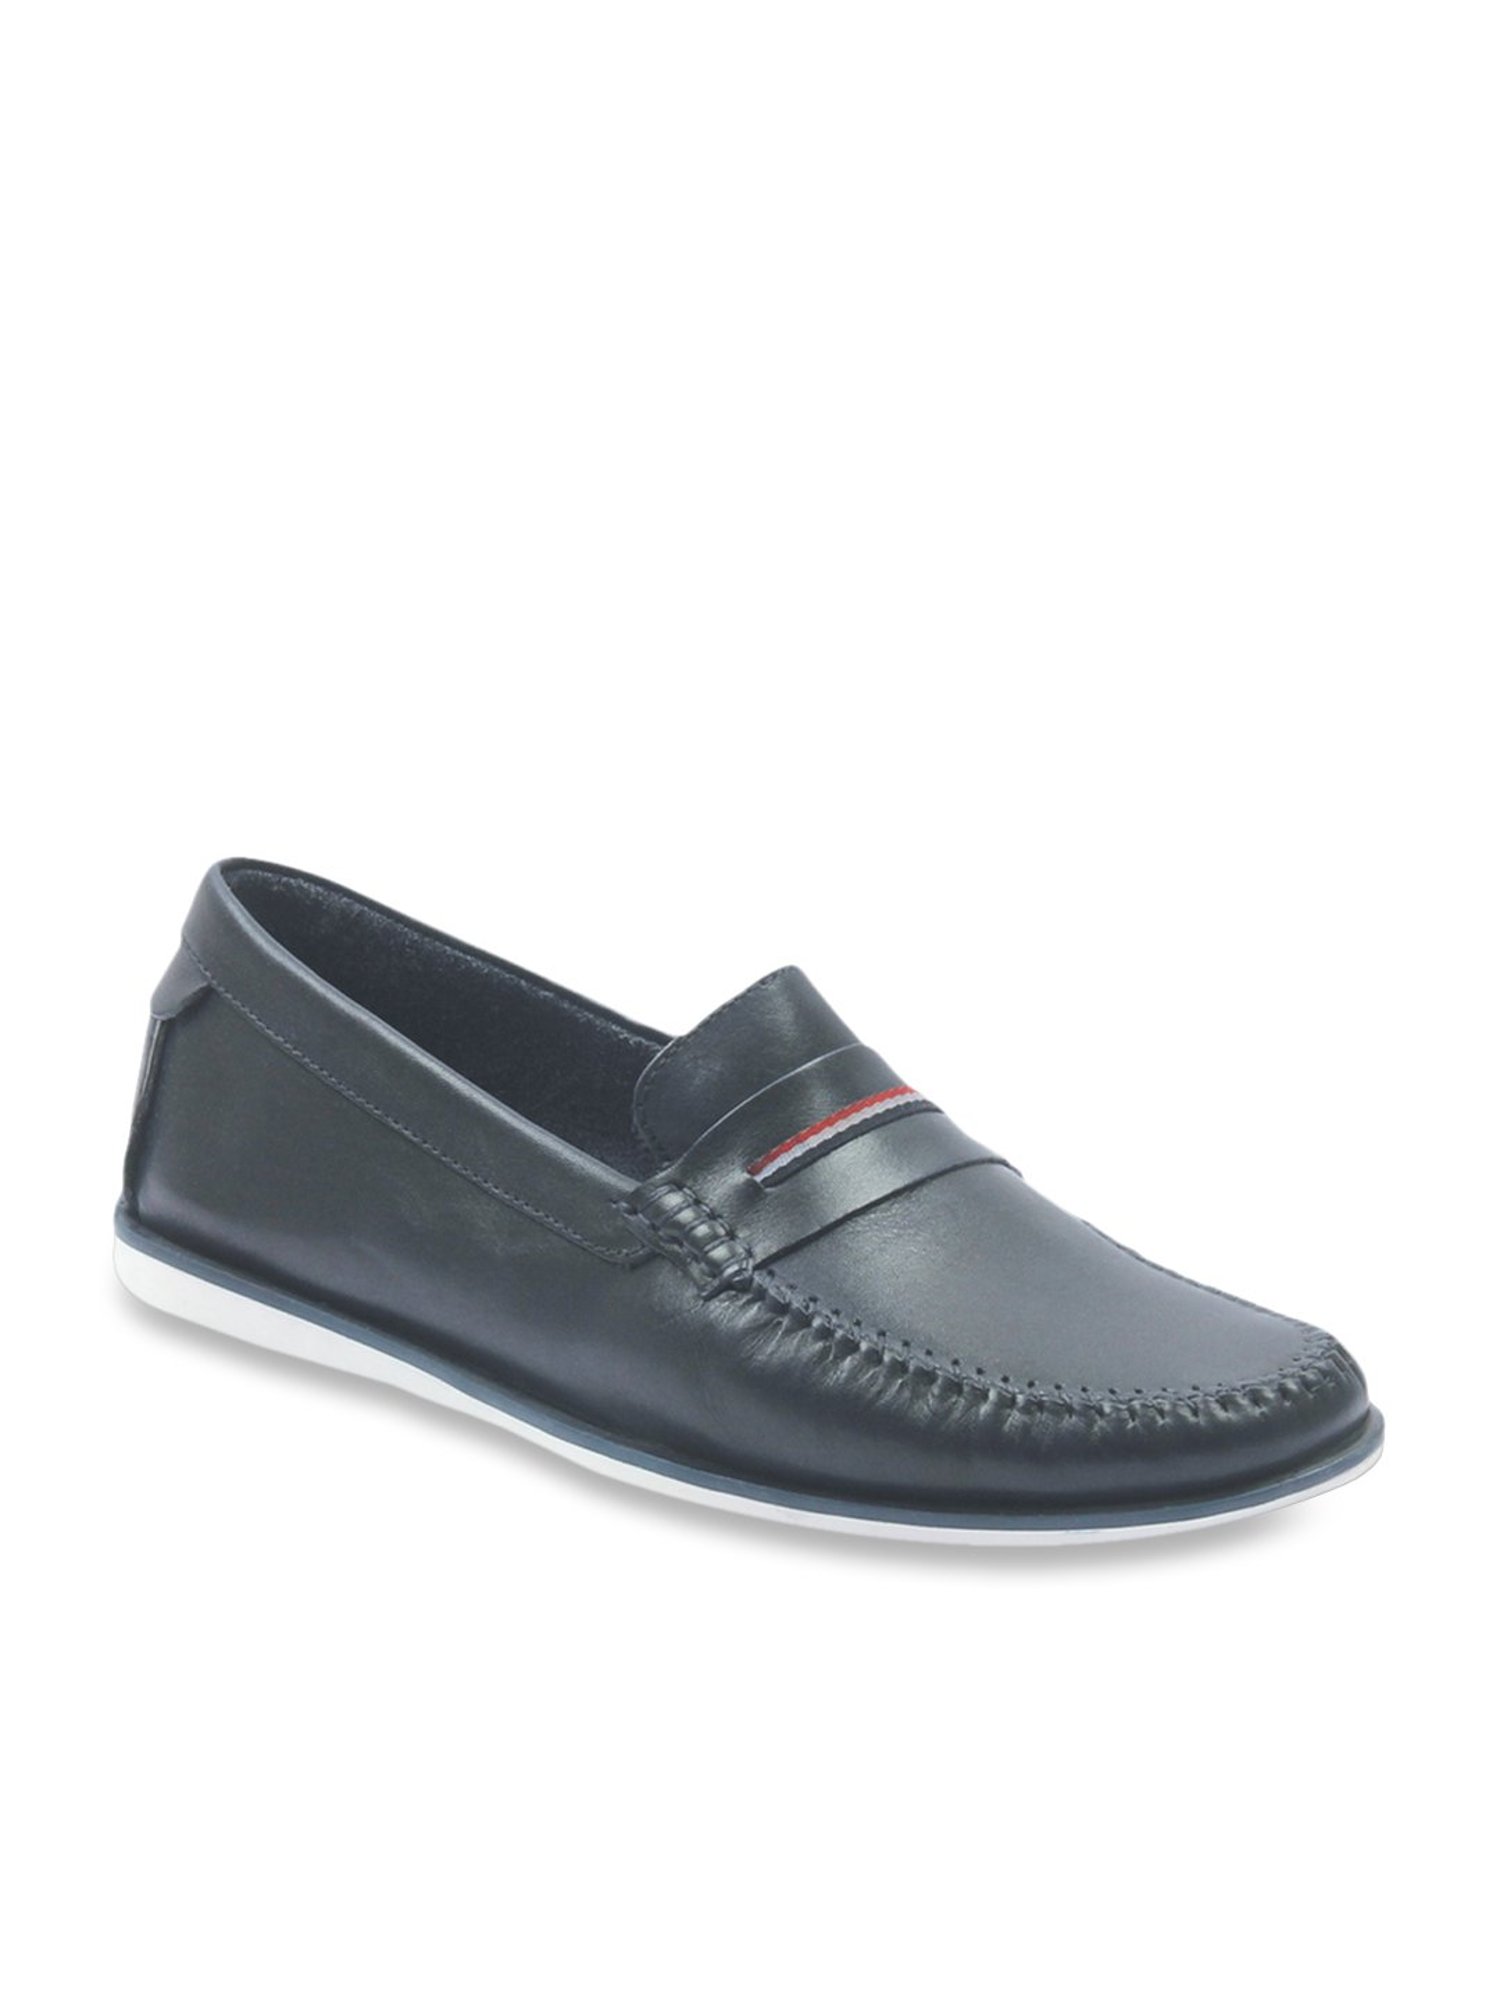 Buy Pavers England Navy Casual Loafers 